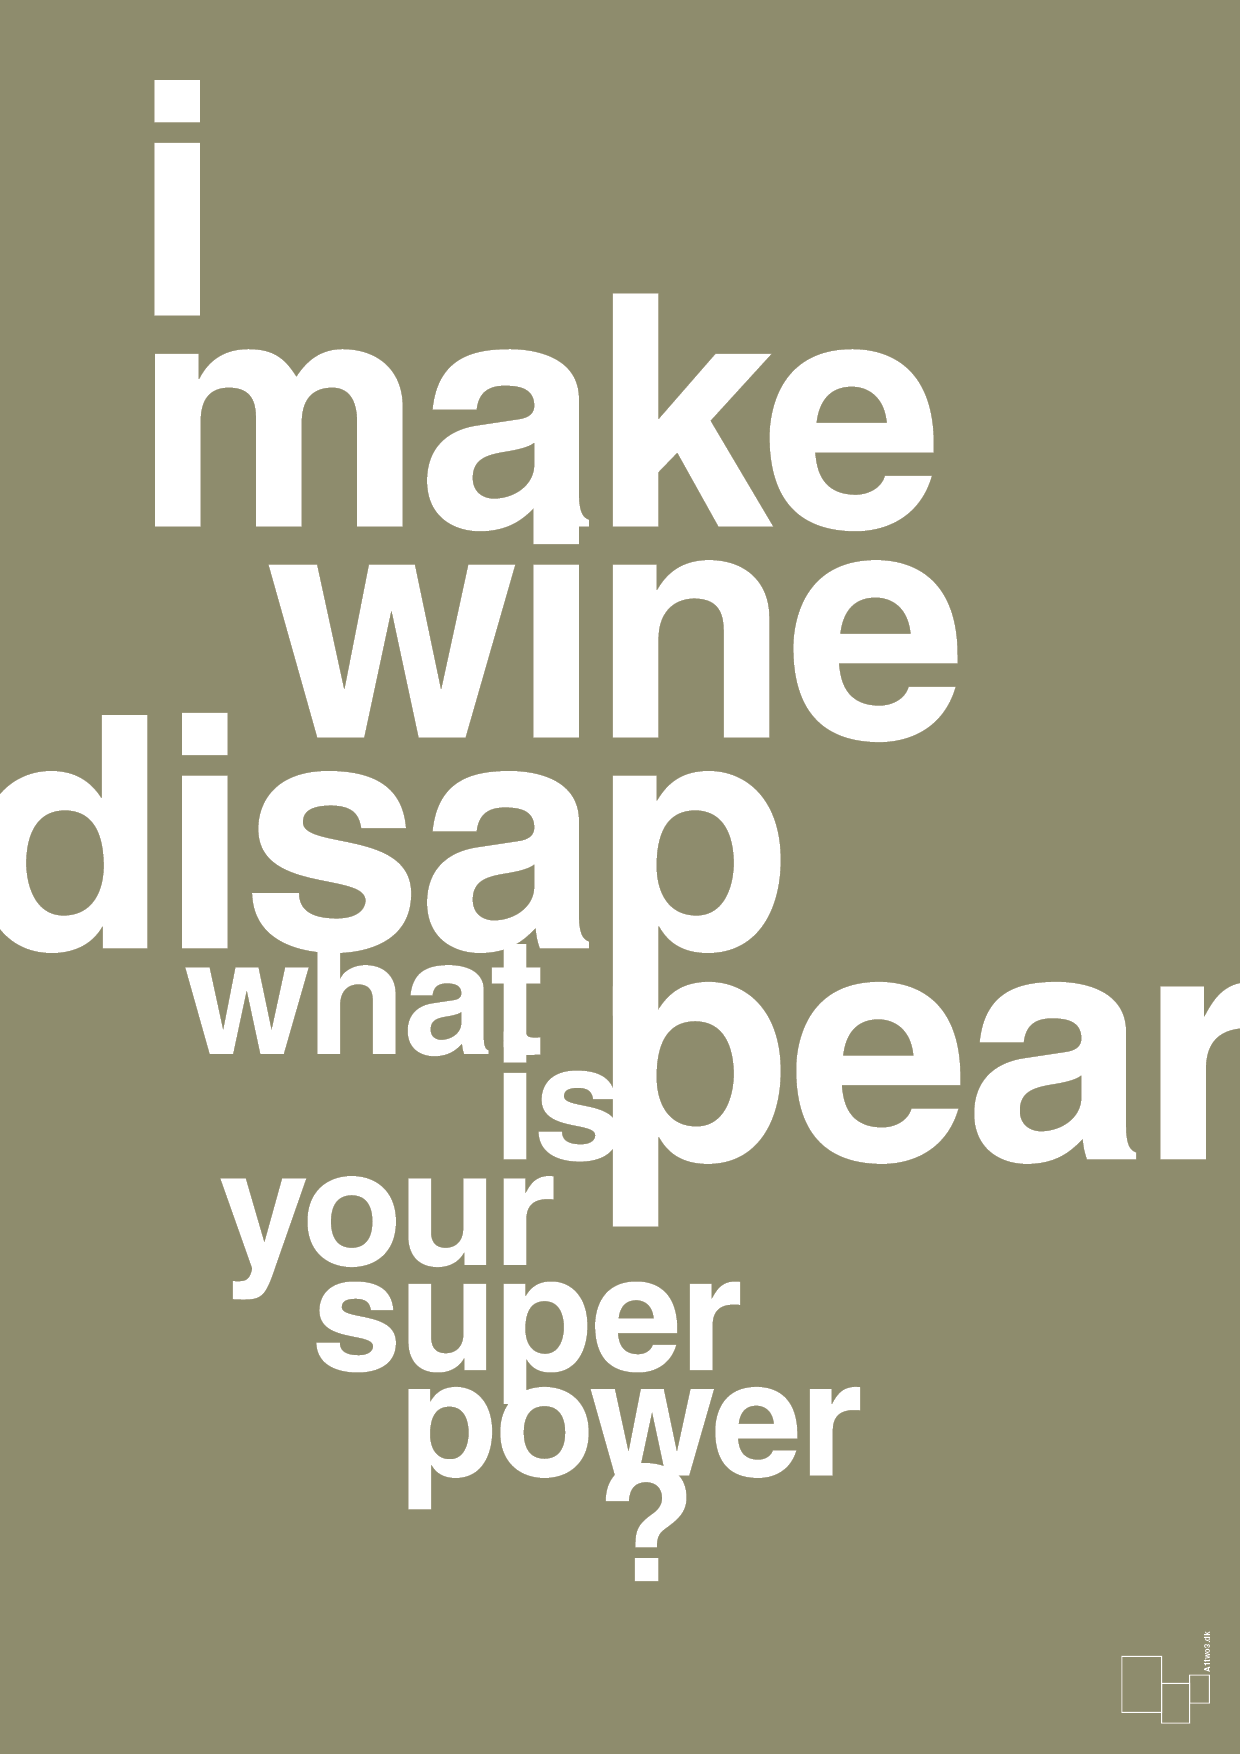 i make wine disappear what is your super power - Plakat med Citater i Misty Forrest